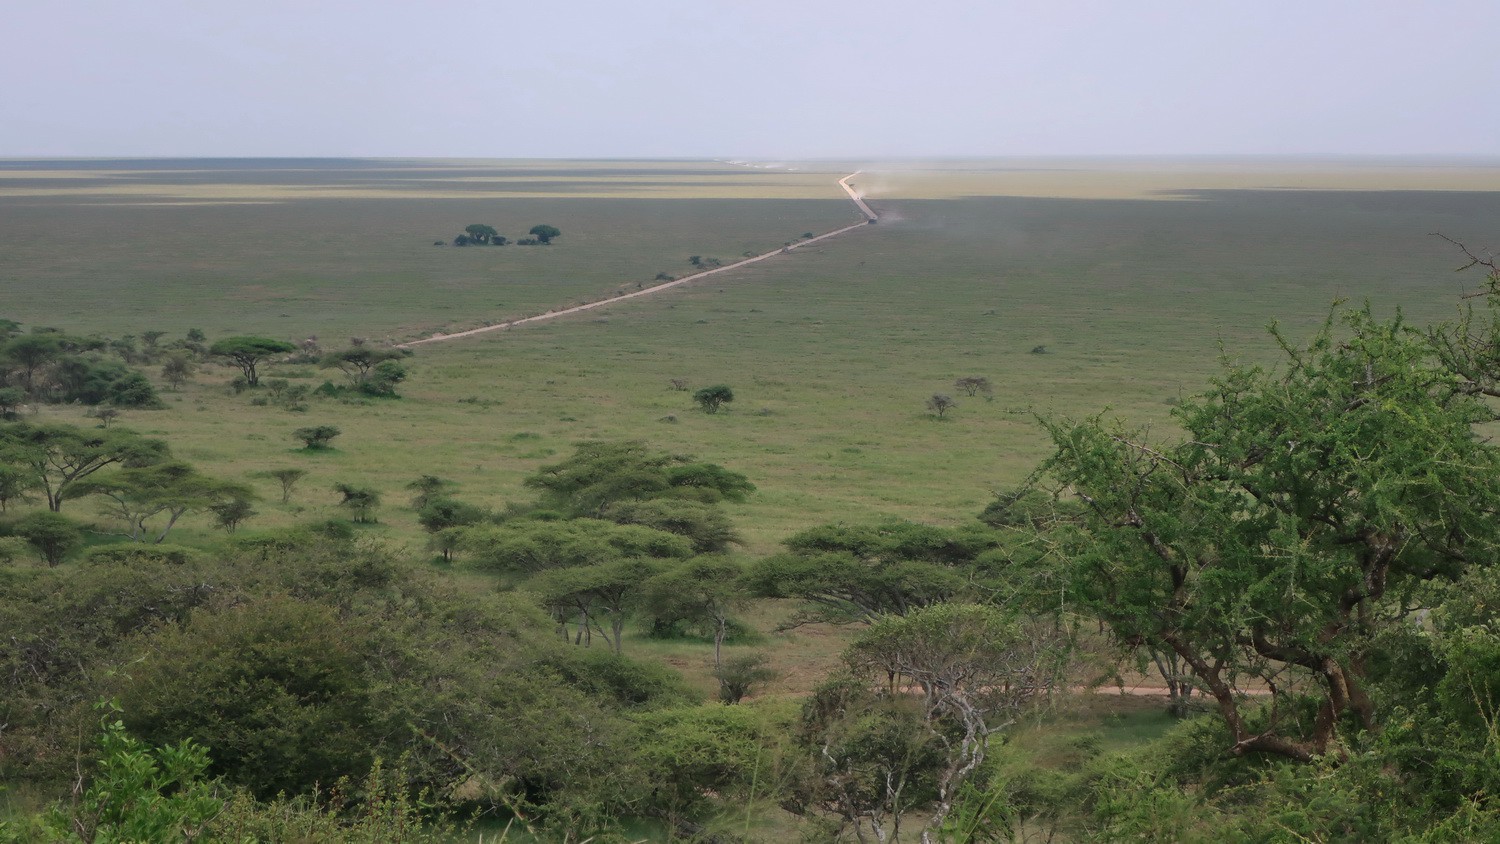 Serengeti seen from the viewpoint on its western entrance